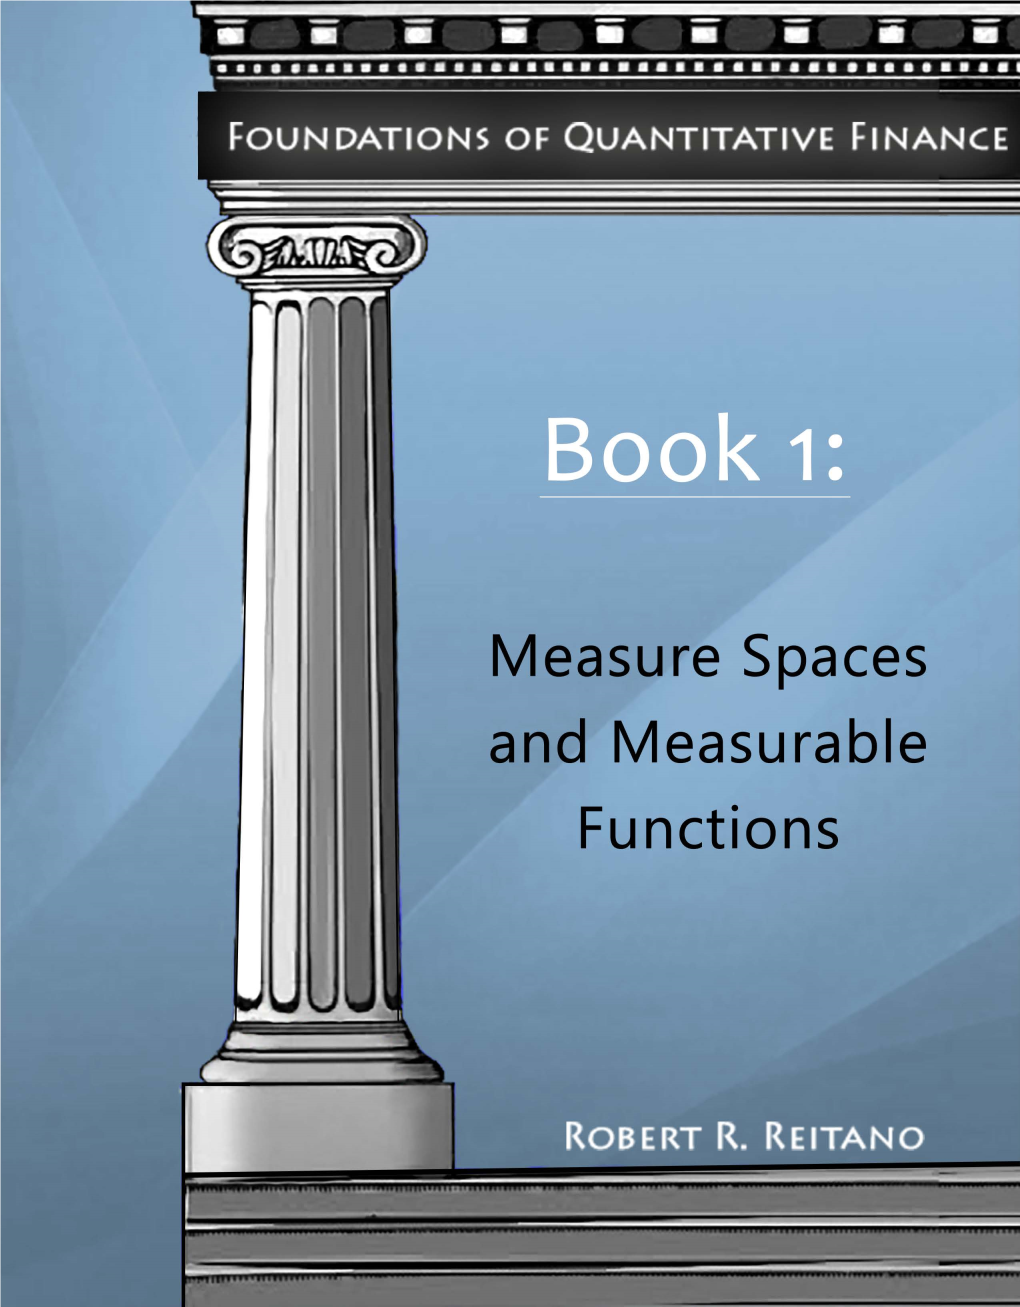 Foundations of Quantitative Finance: 1. Measure Spaces and Measurable Functions